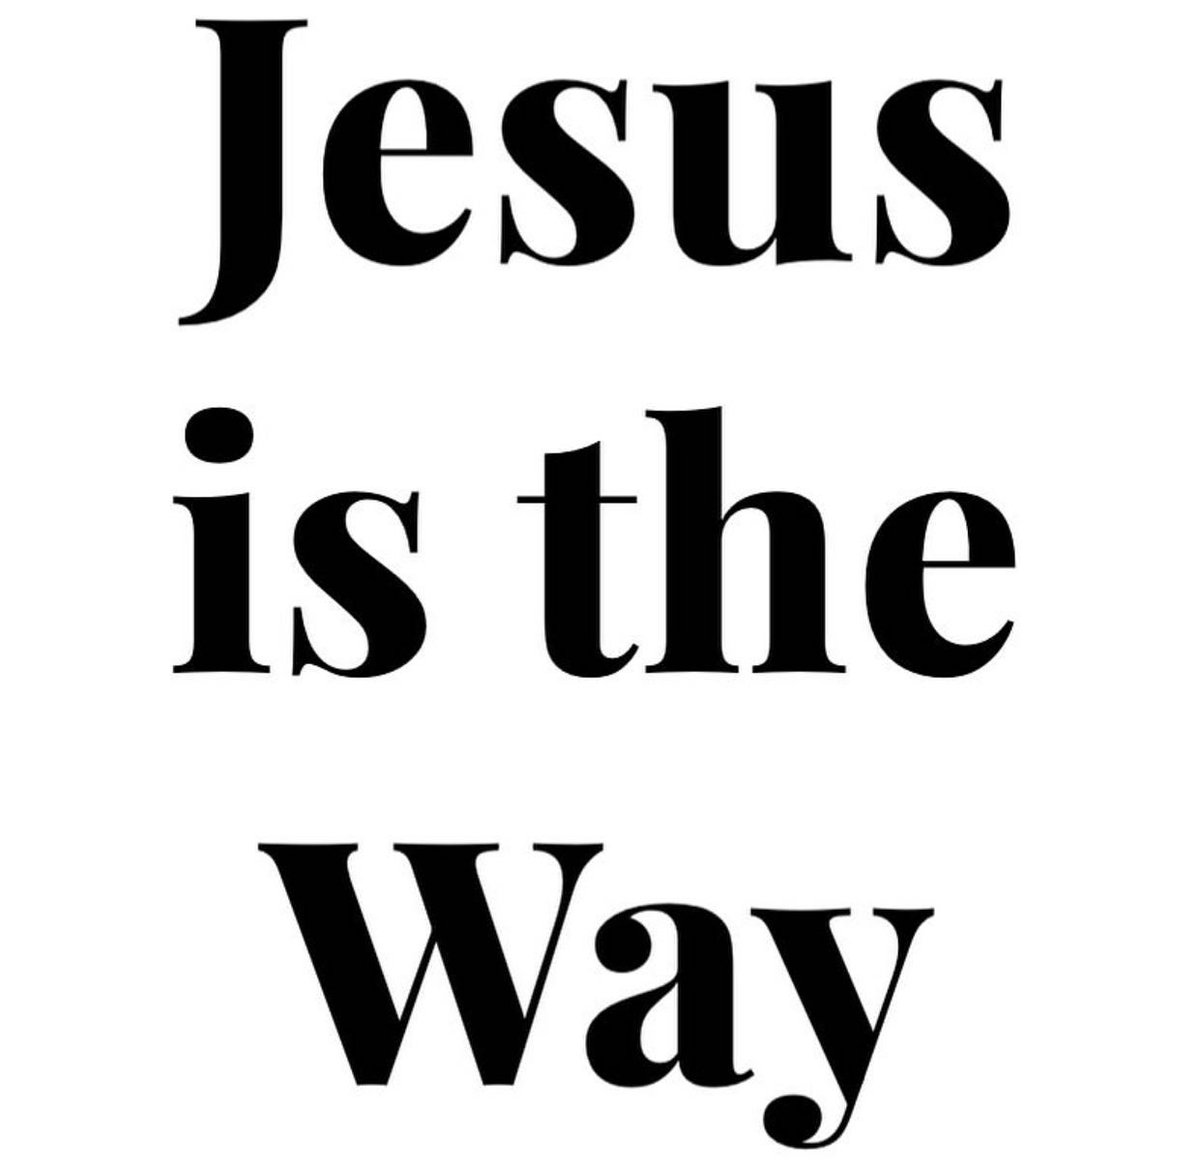 Jesus Christ is the Way, The Truth, and The Life! 🙏🏽🙌🏽✝️😃